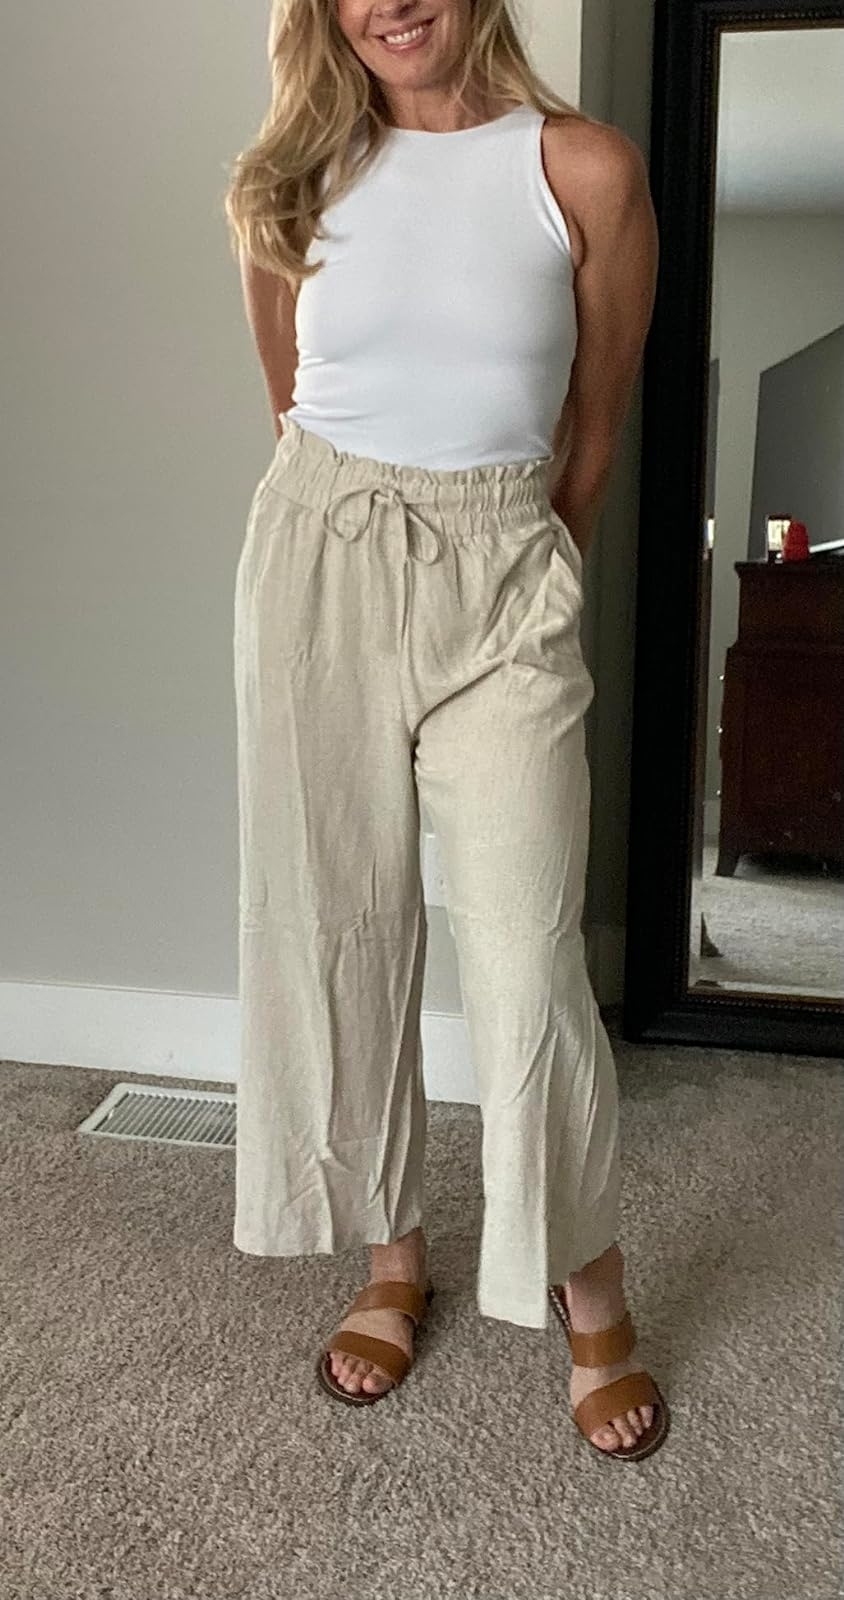 Woman in white tank top and beige linen pants with brown sandals, showcasing a casual outfit